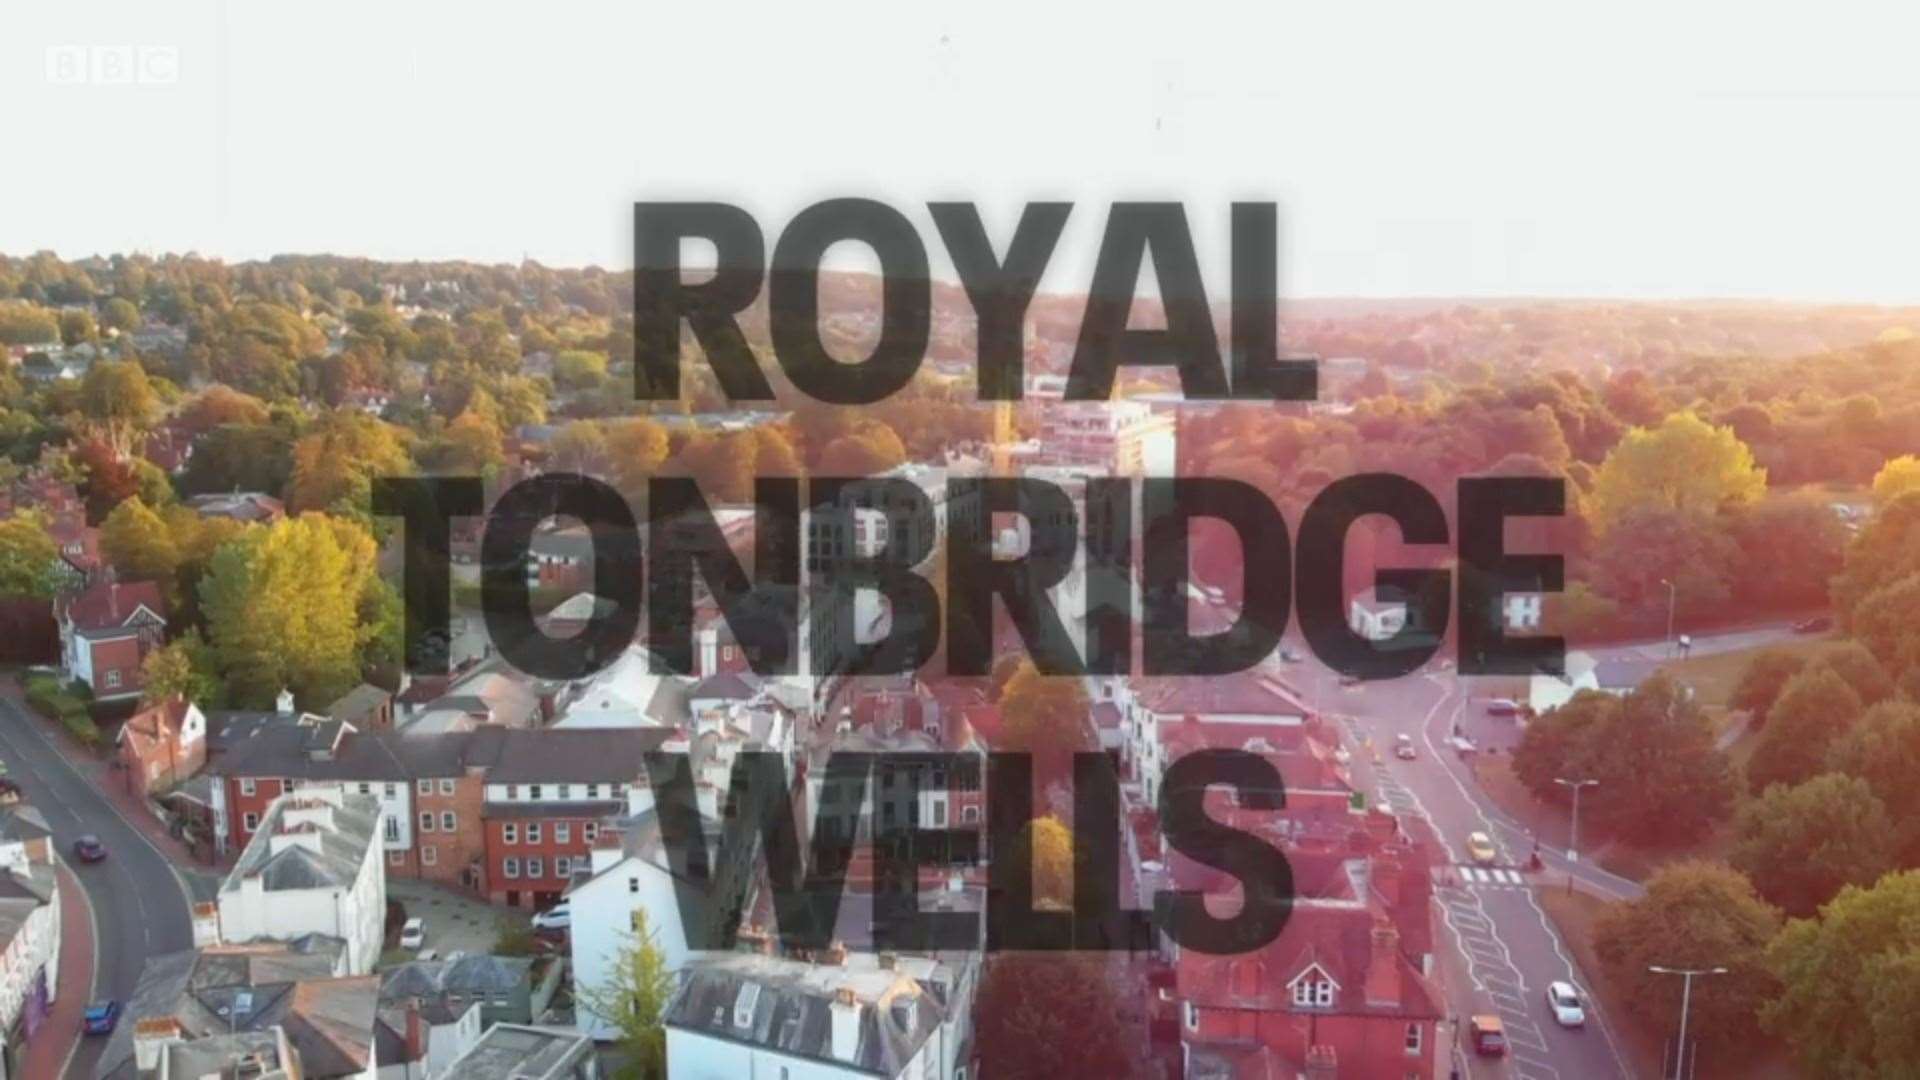 The BBC appeared to mix up Royal Tunbridge Wells and Tonbridge during its Interior Design Masters show. Picture: BBC